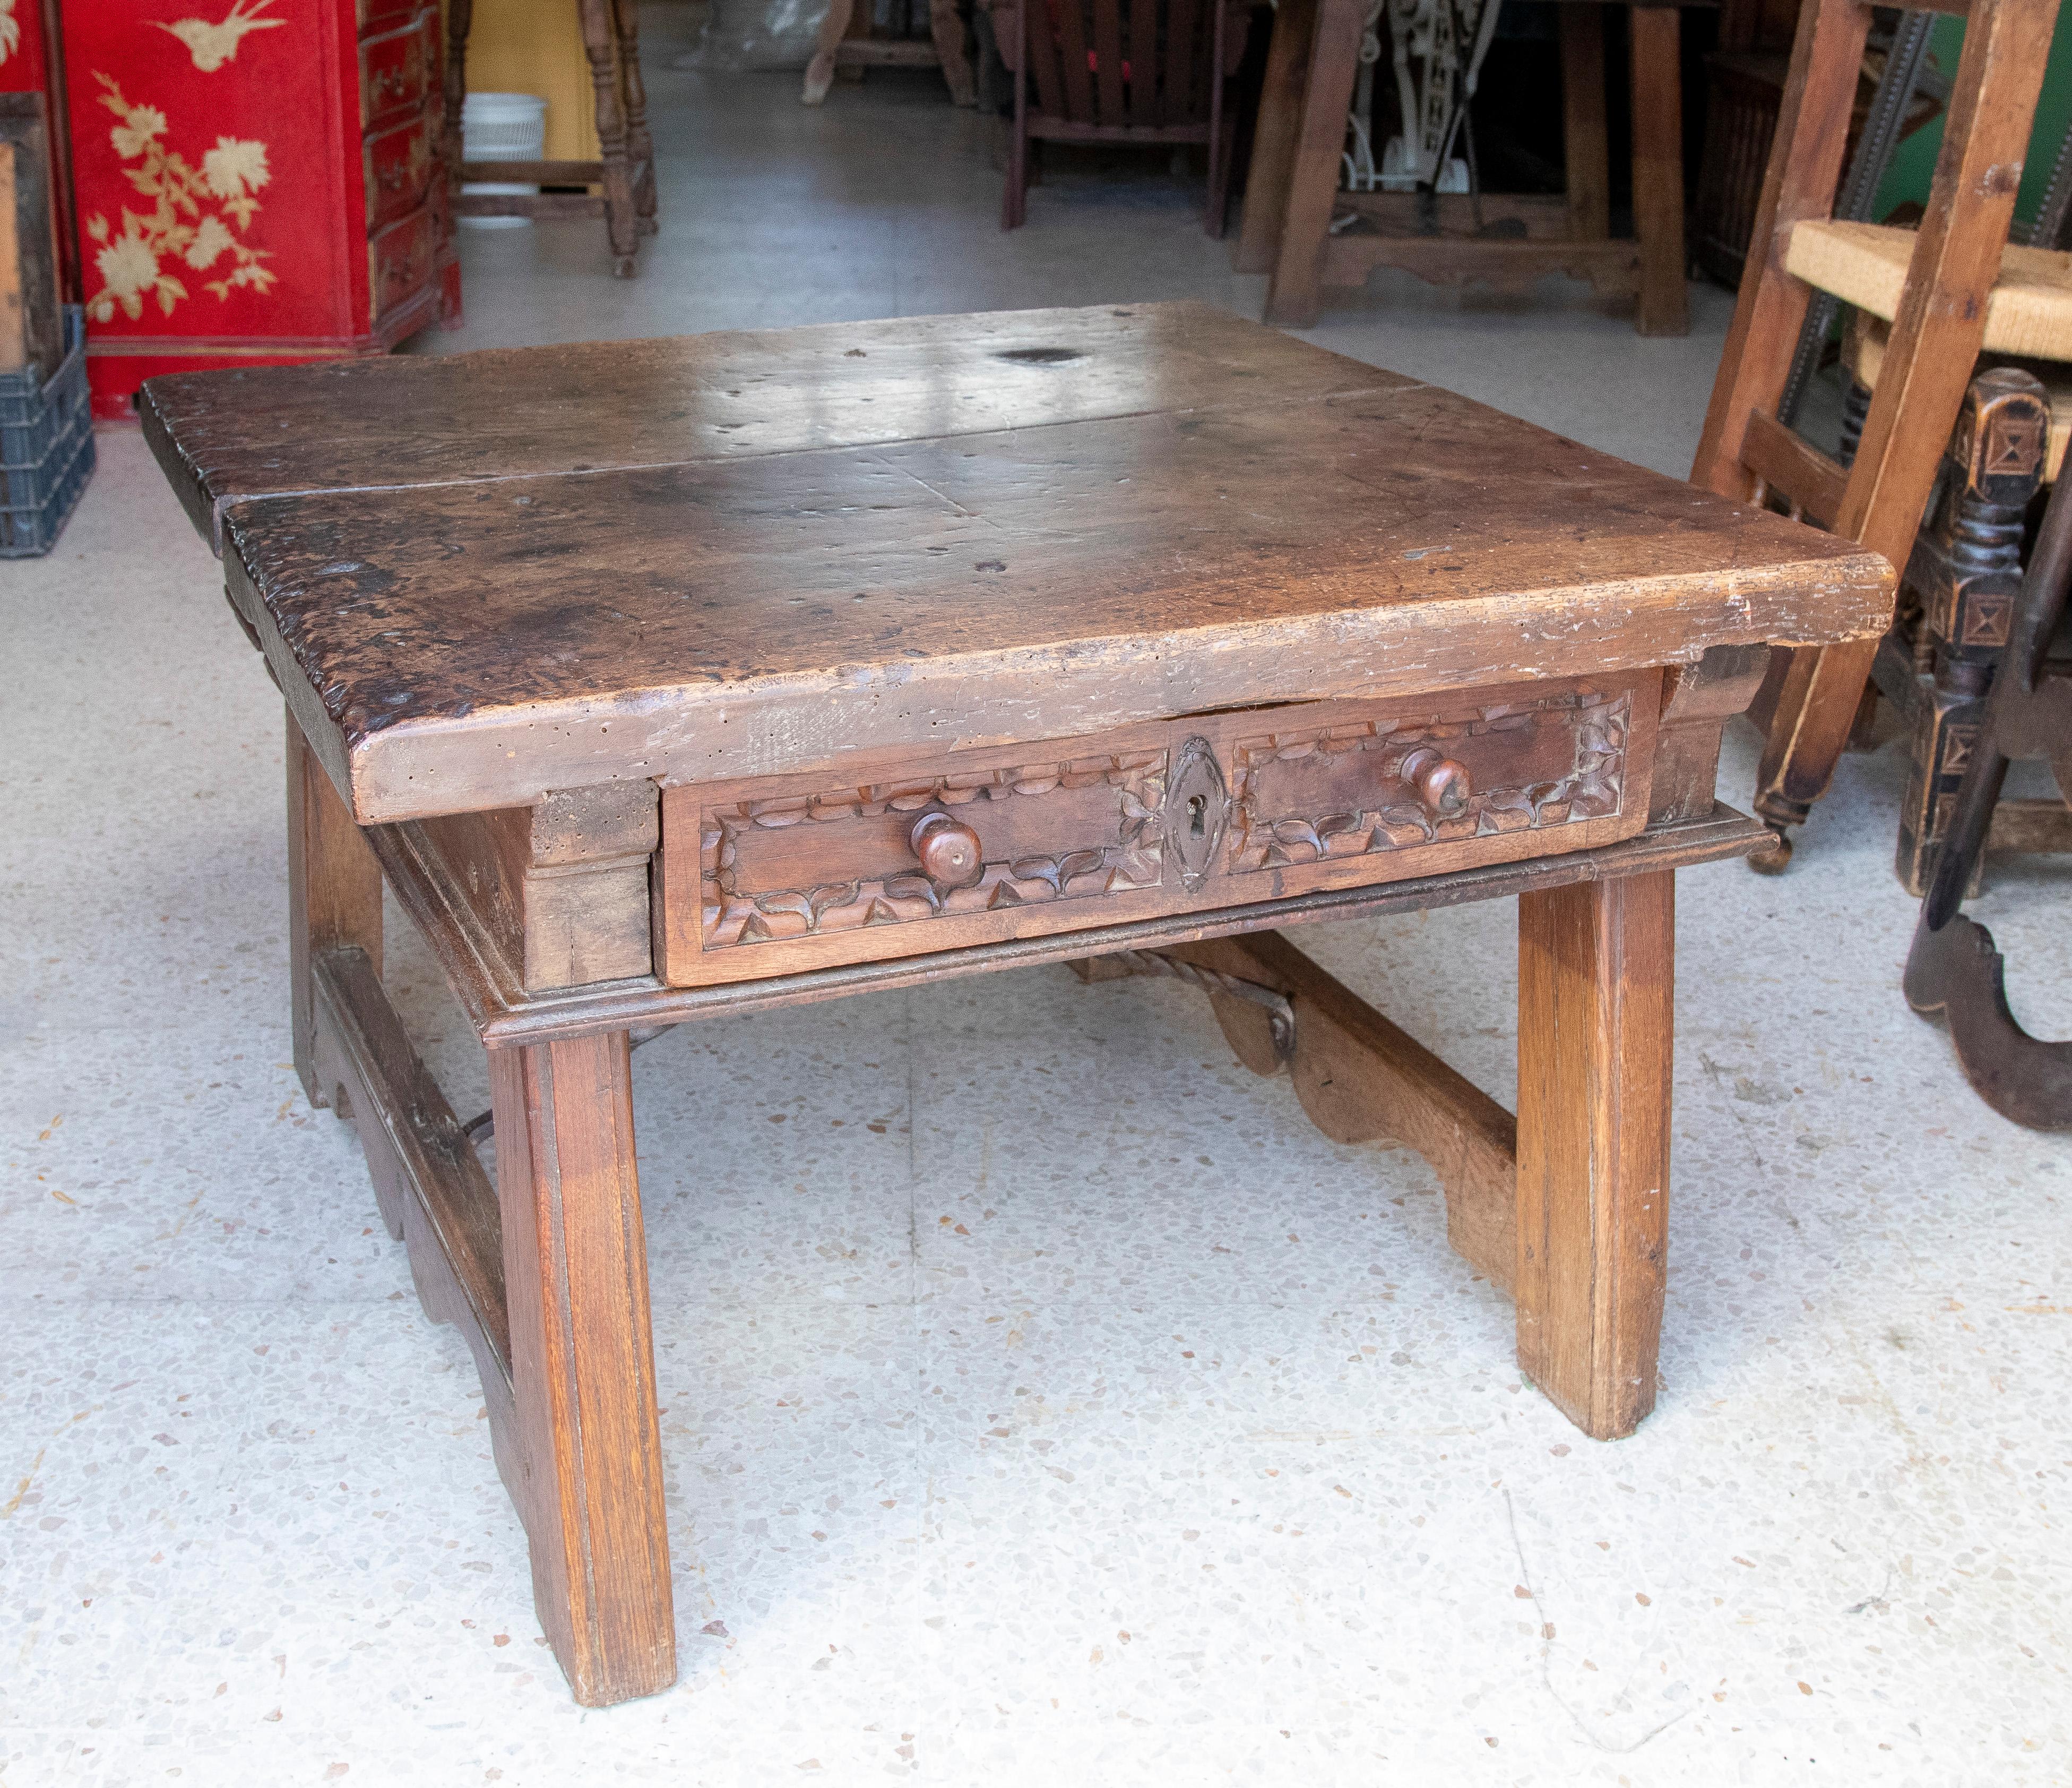 18th Century Spanish side table with drawer and iron joining legs.